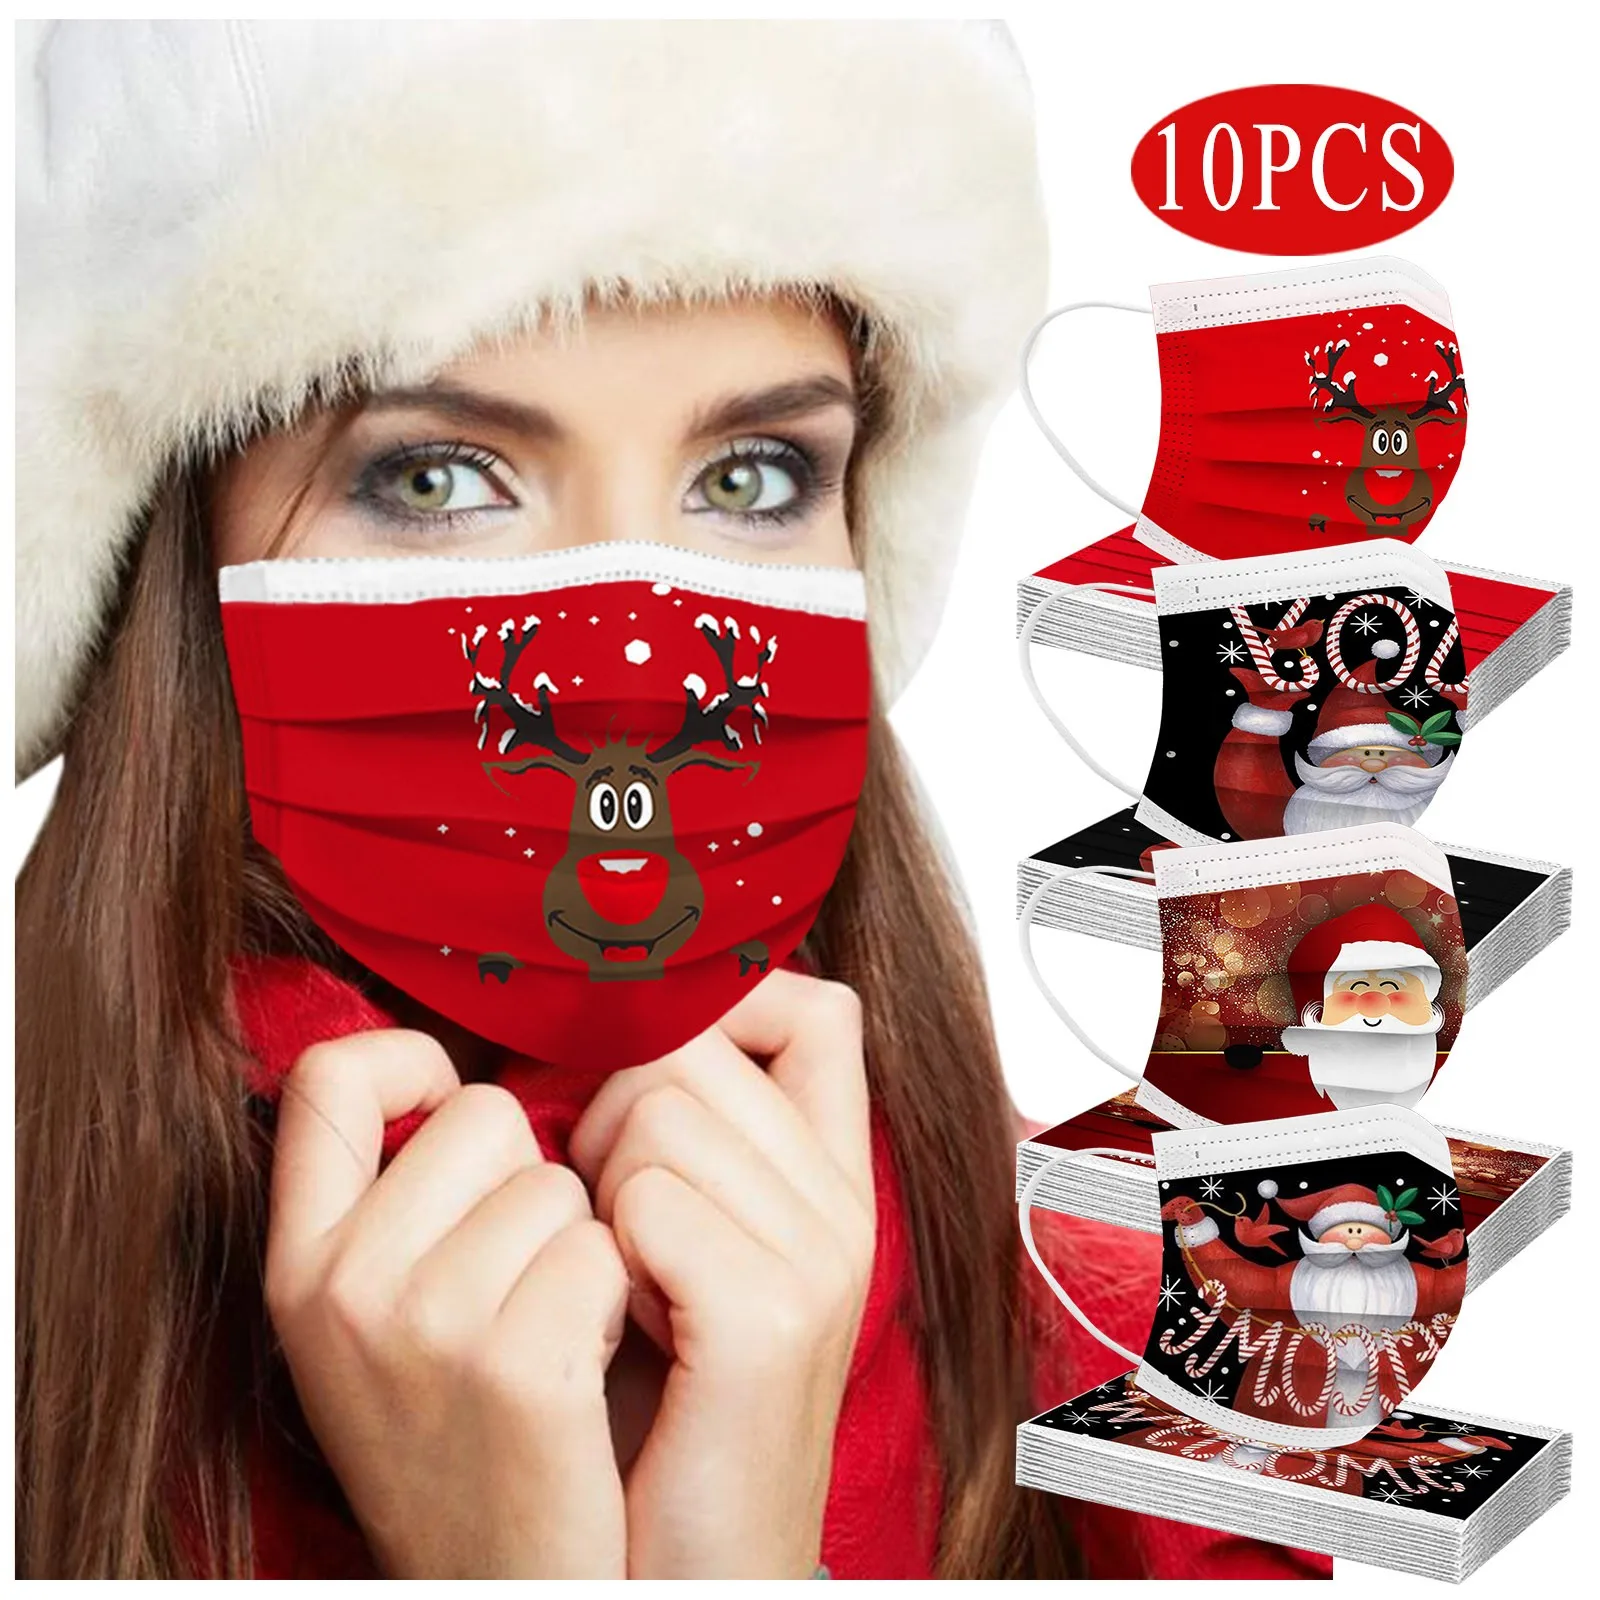 

10PCS Merry Christmas Adults Multi-Prints Breathable 3 -Layer Disposable Mask Cosplay Christmas Disposable Mask EIK Mascarillas